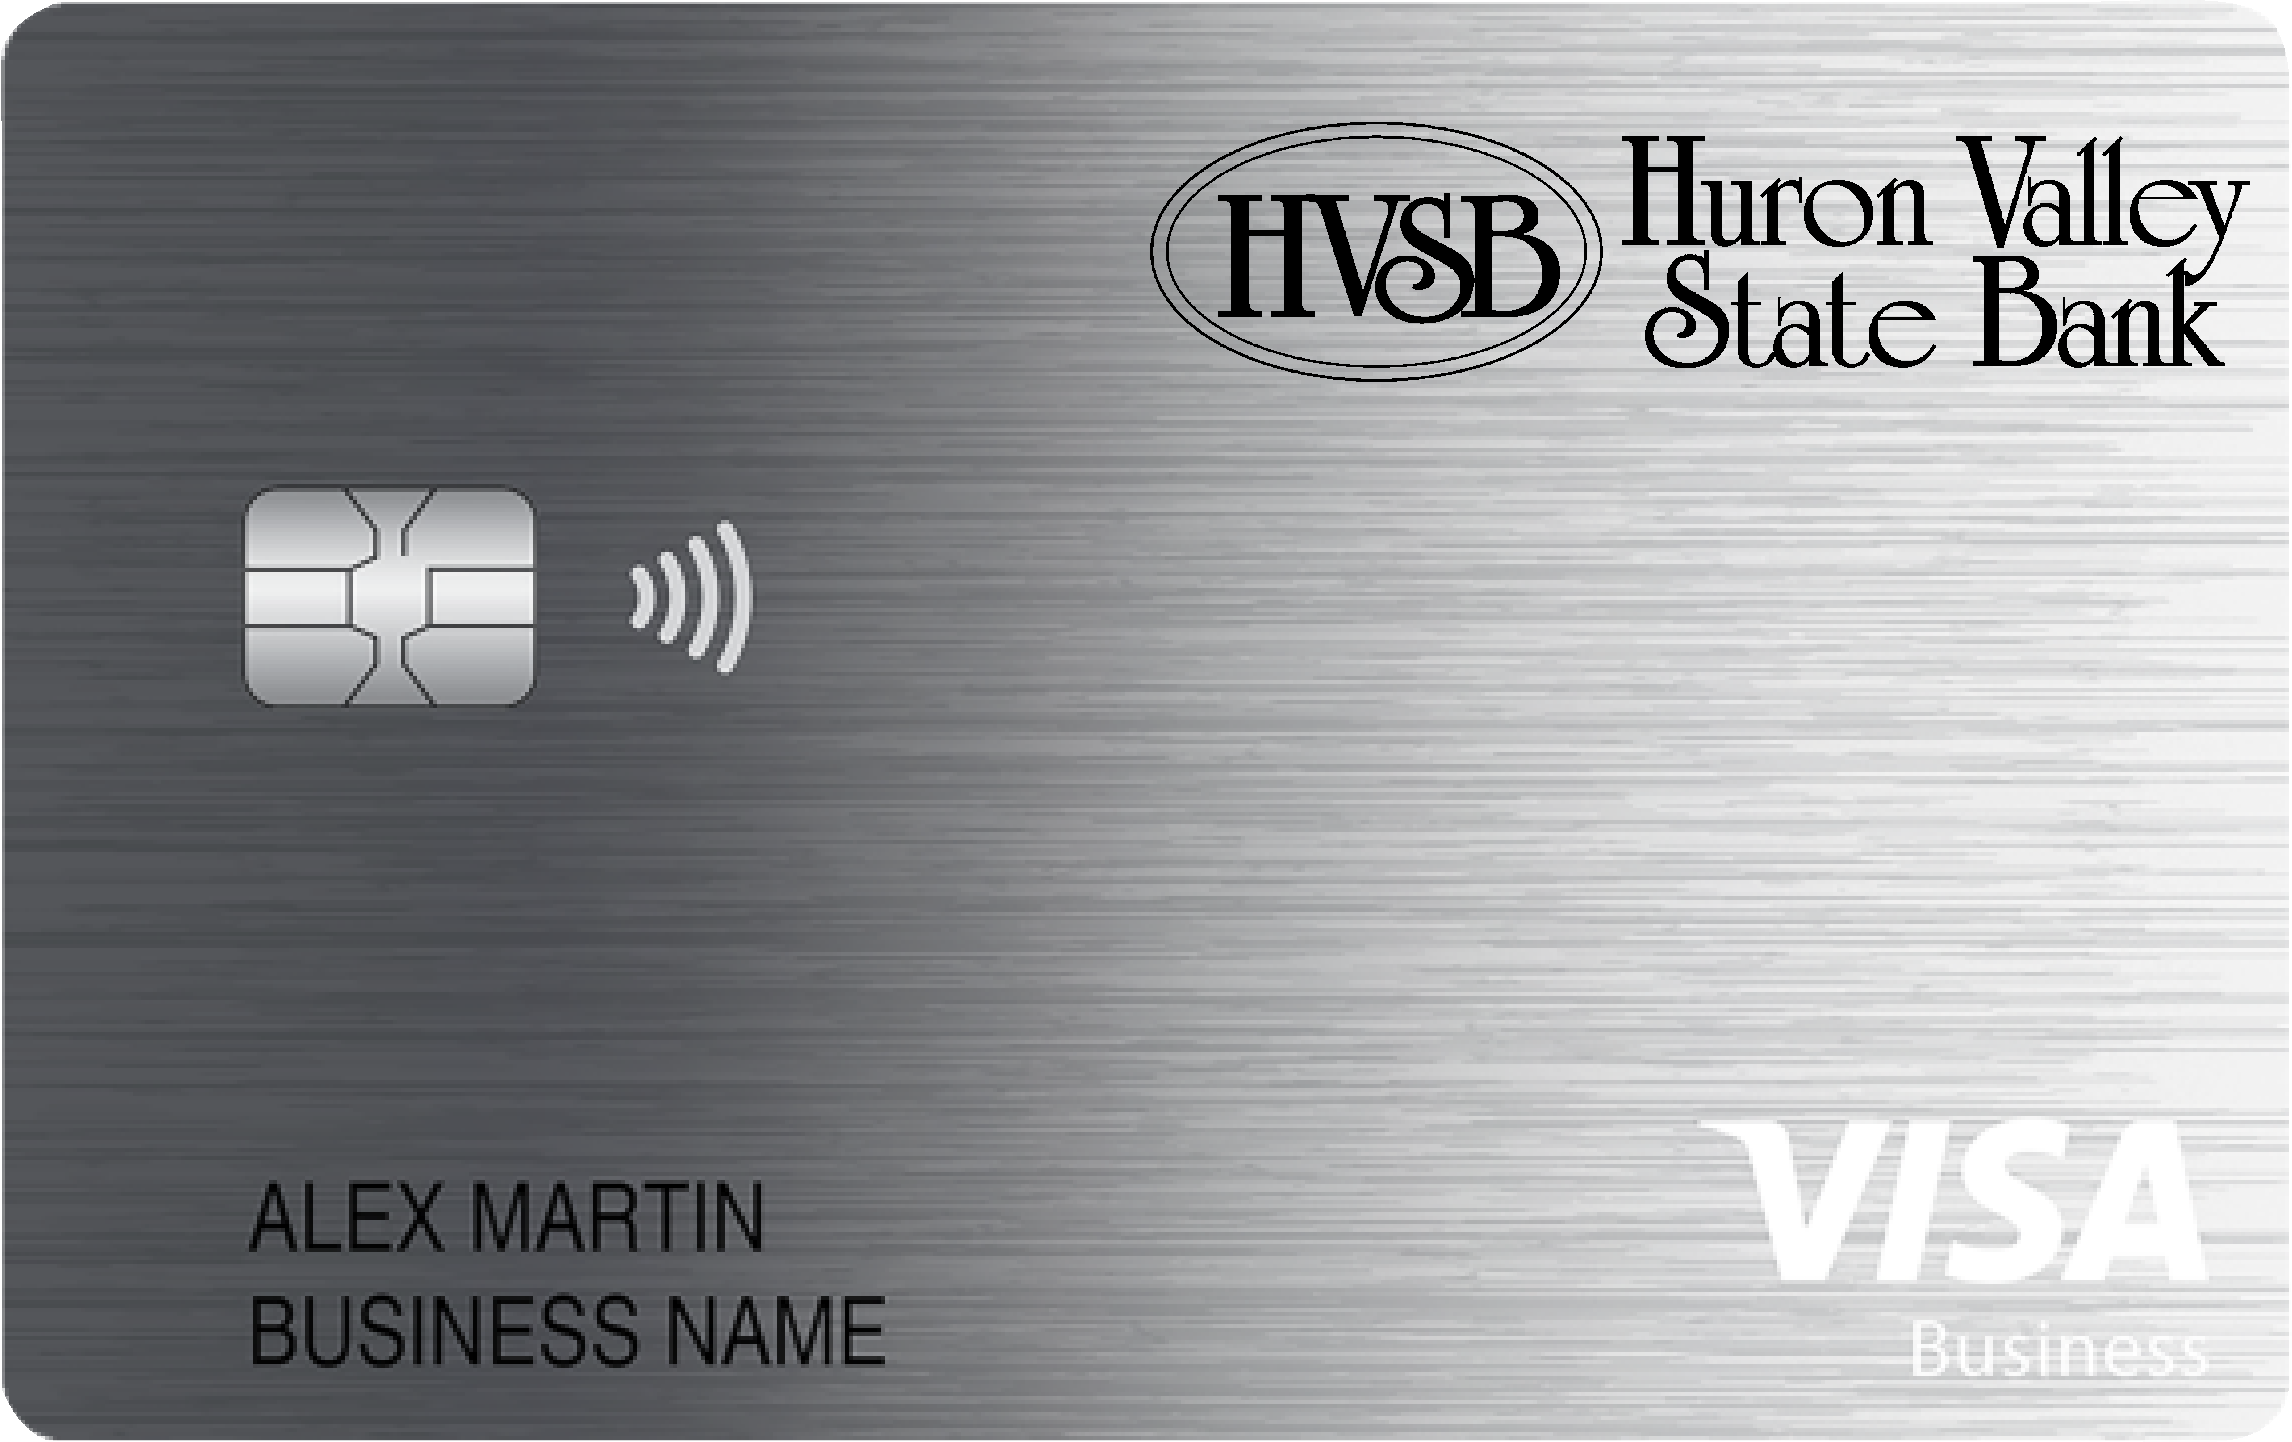 Huron Valley State Bank Business Cash Preferred Card